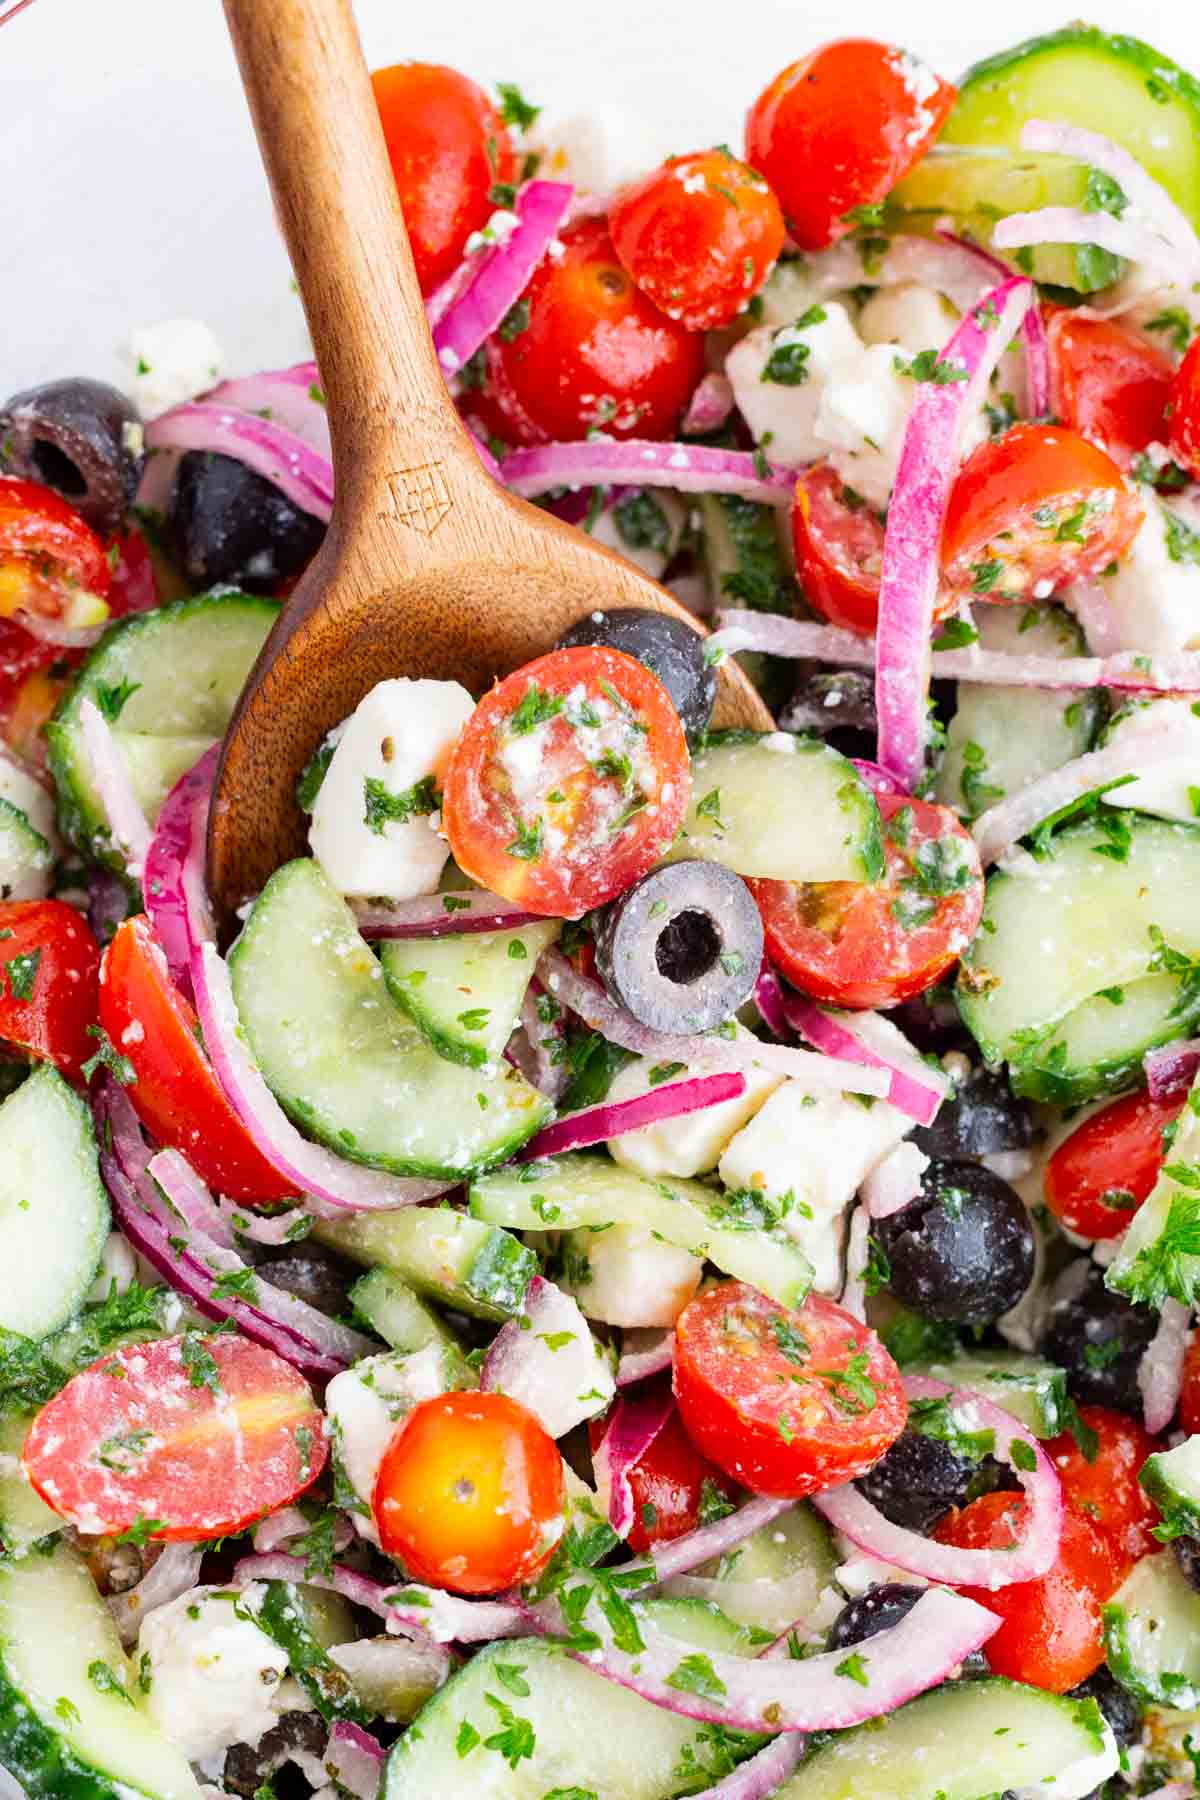 This Greek Cucumber Salad is a healthy and refreshing summer recipe.